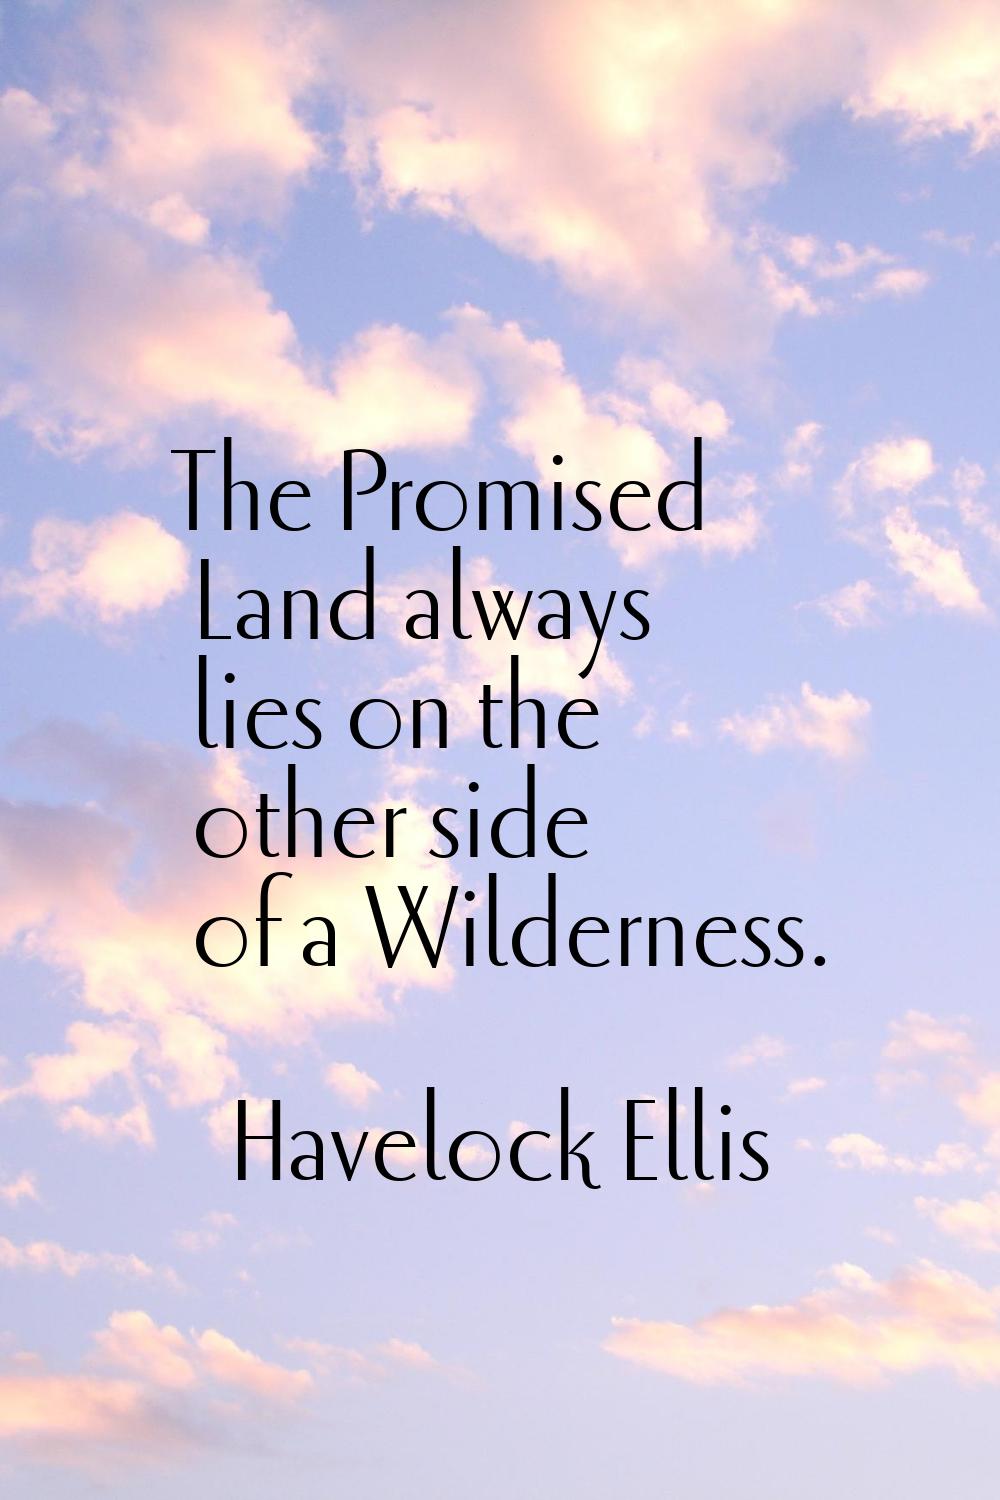 The Promised Land always lies on the other side of a Wilderness.